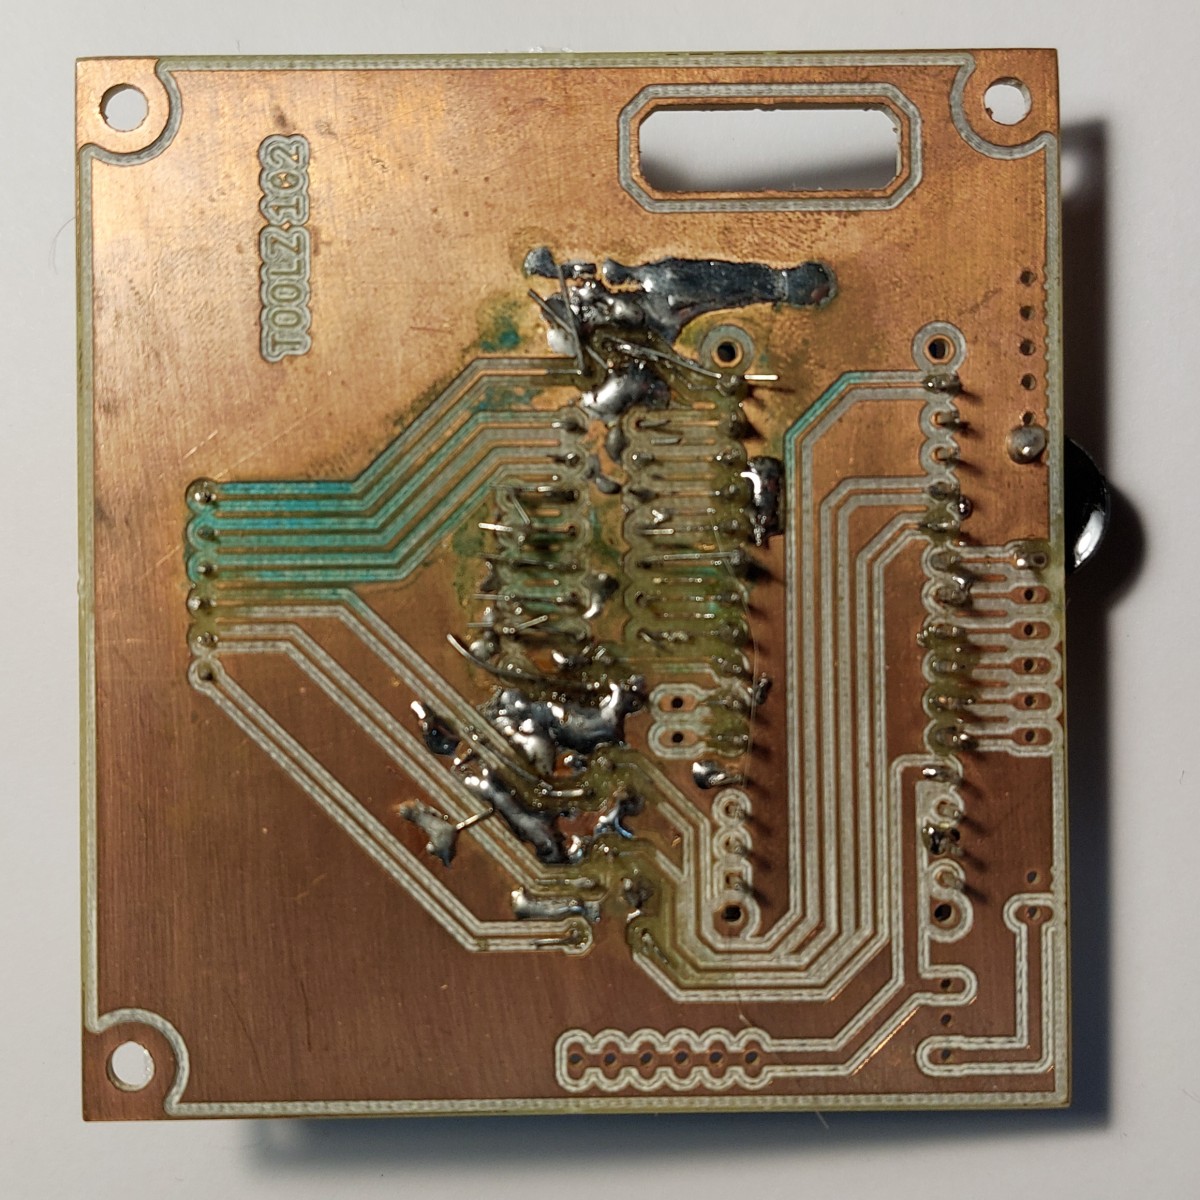 Rear side of the assembled board